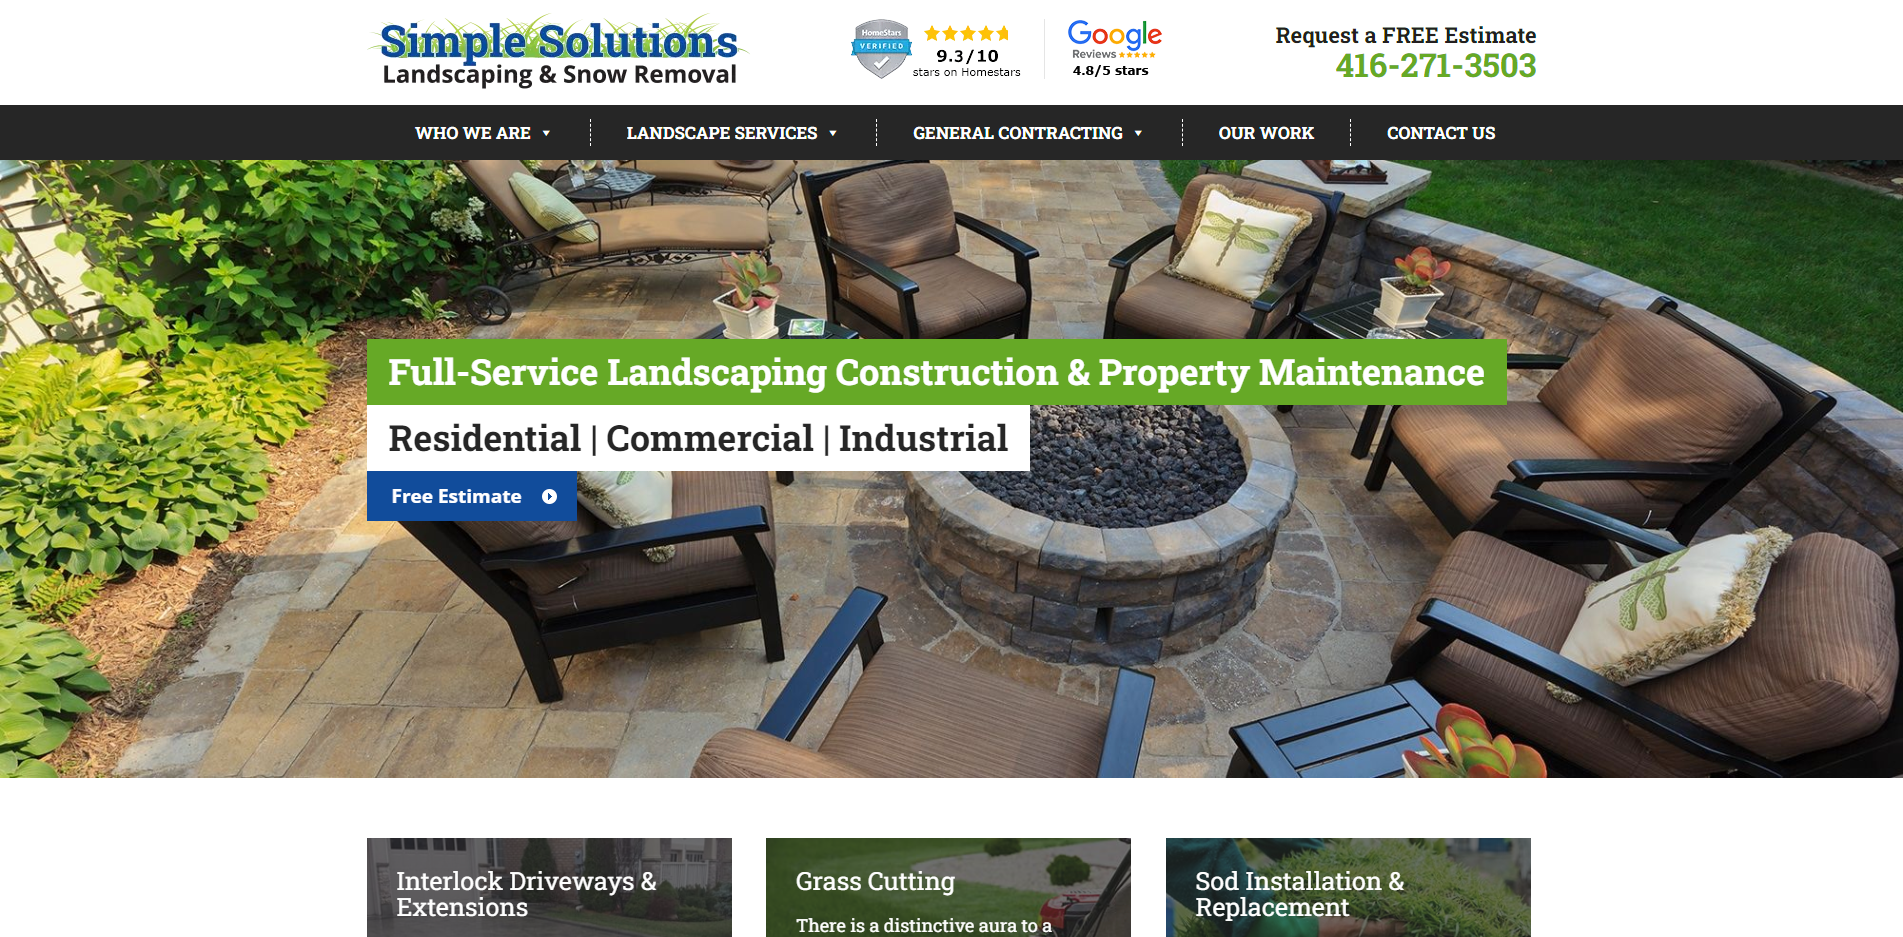 Simple Solutions Landscaping & Snow Removal